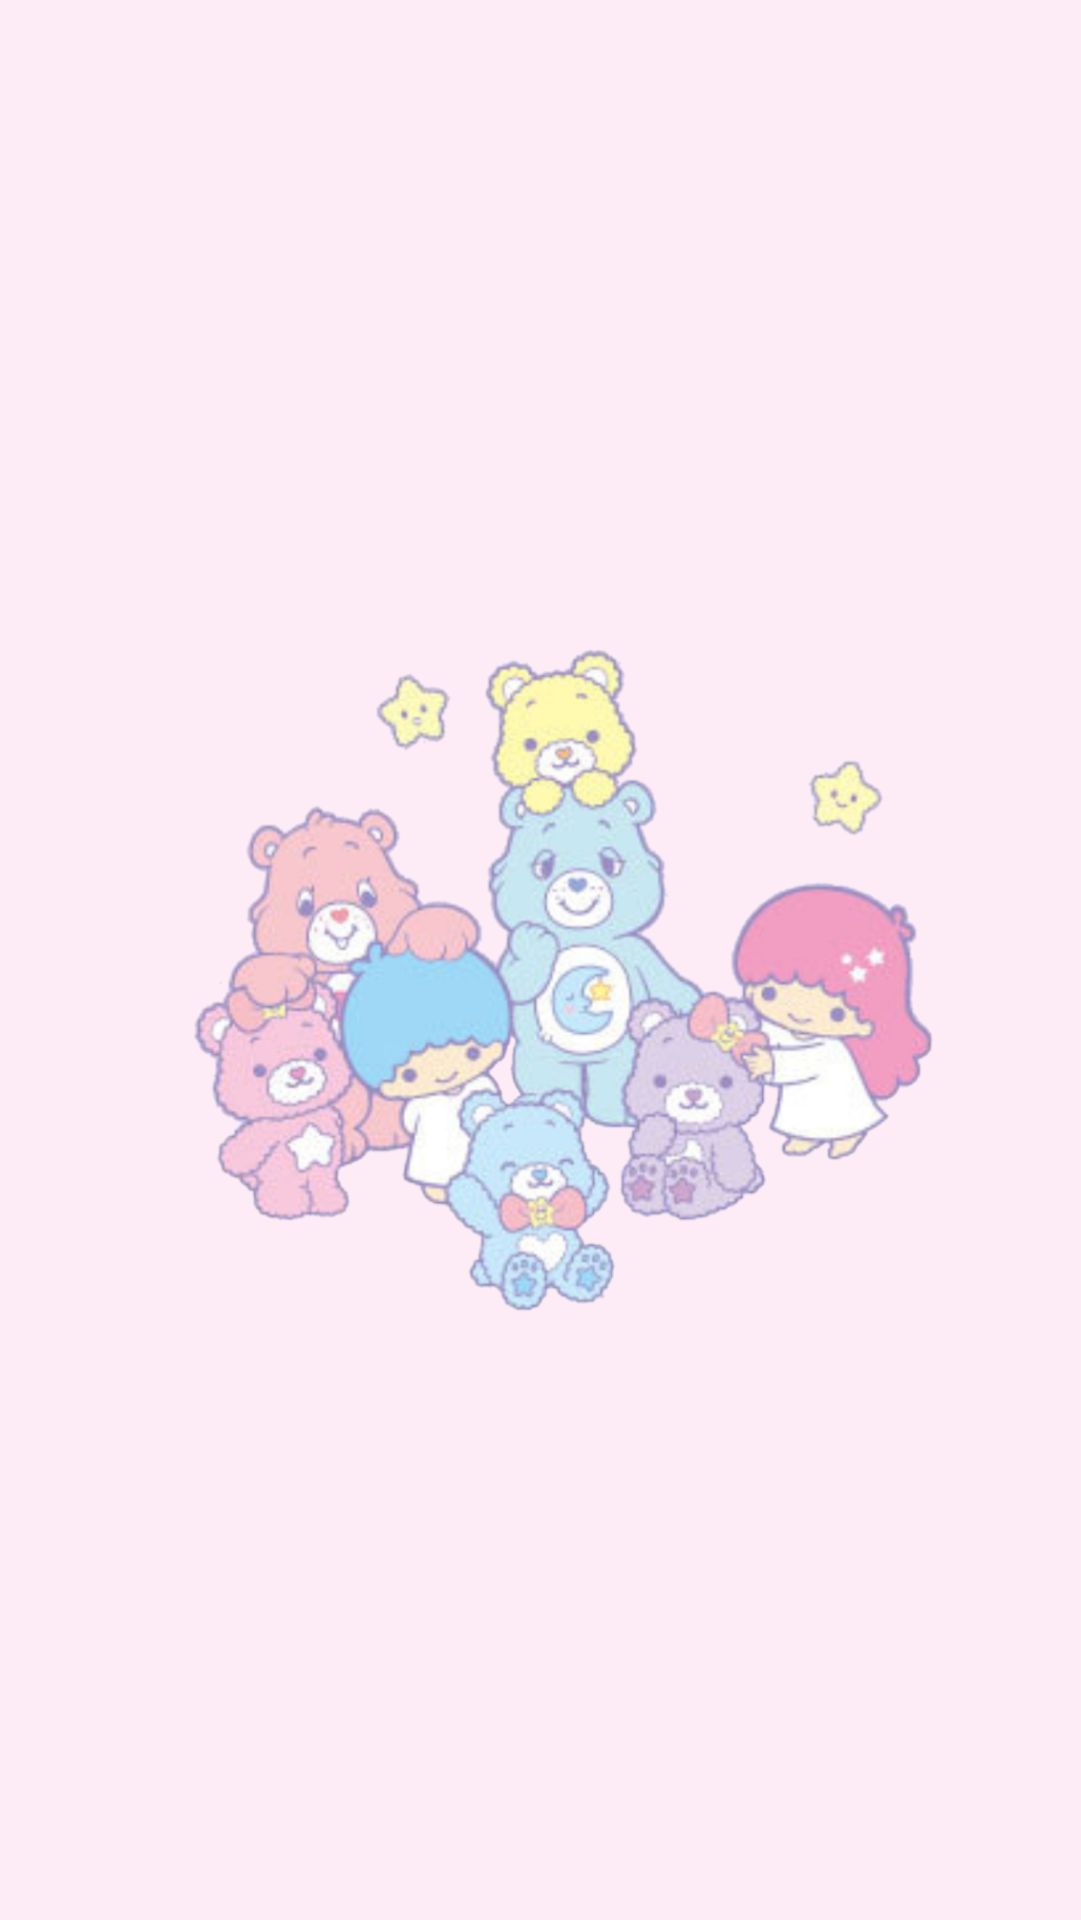 HD wallpaper TV Show The Care Bears  Wallpaper Flare